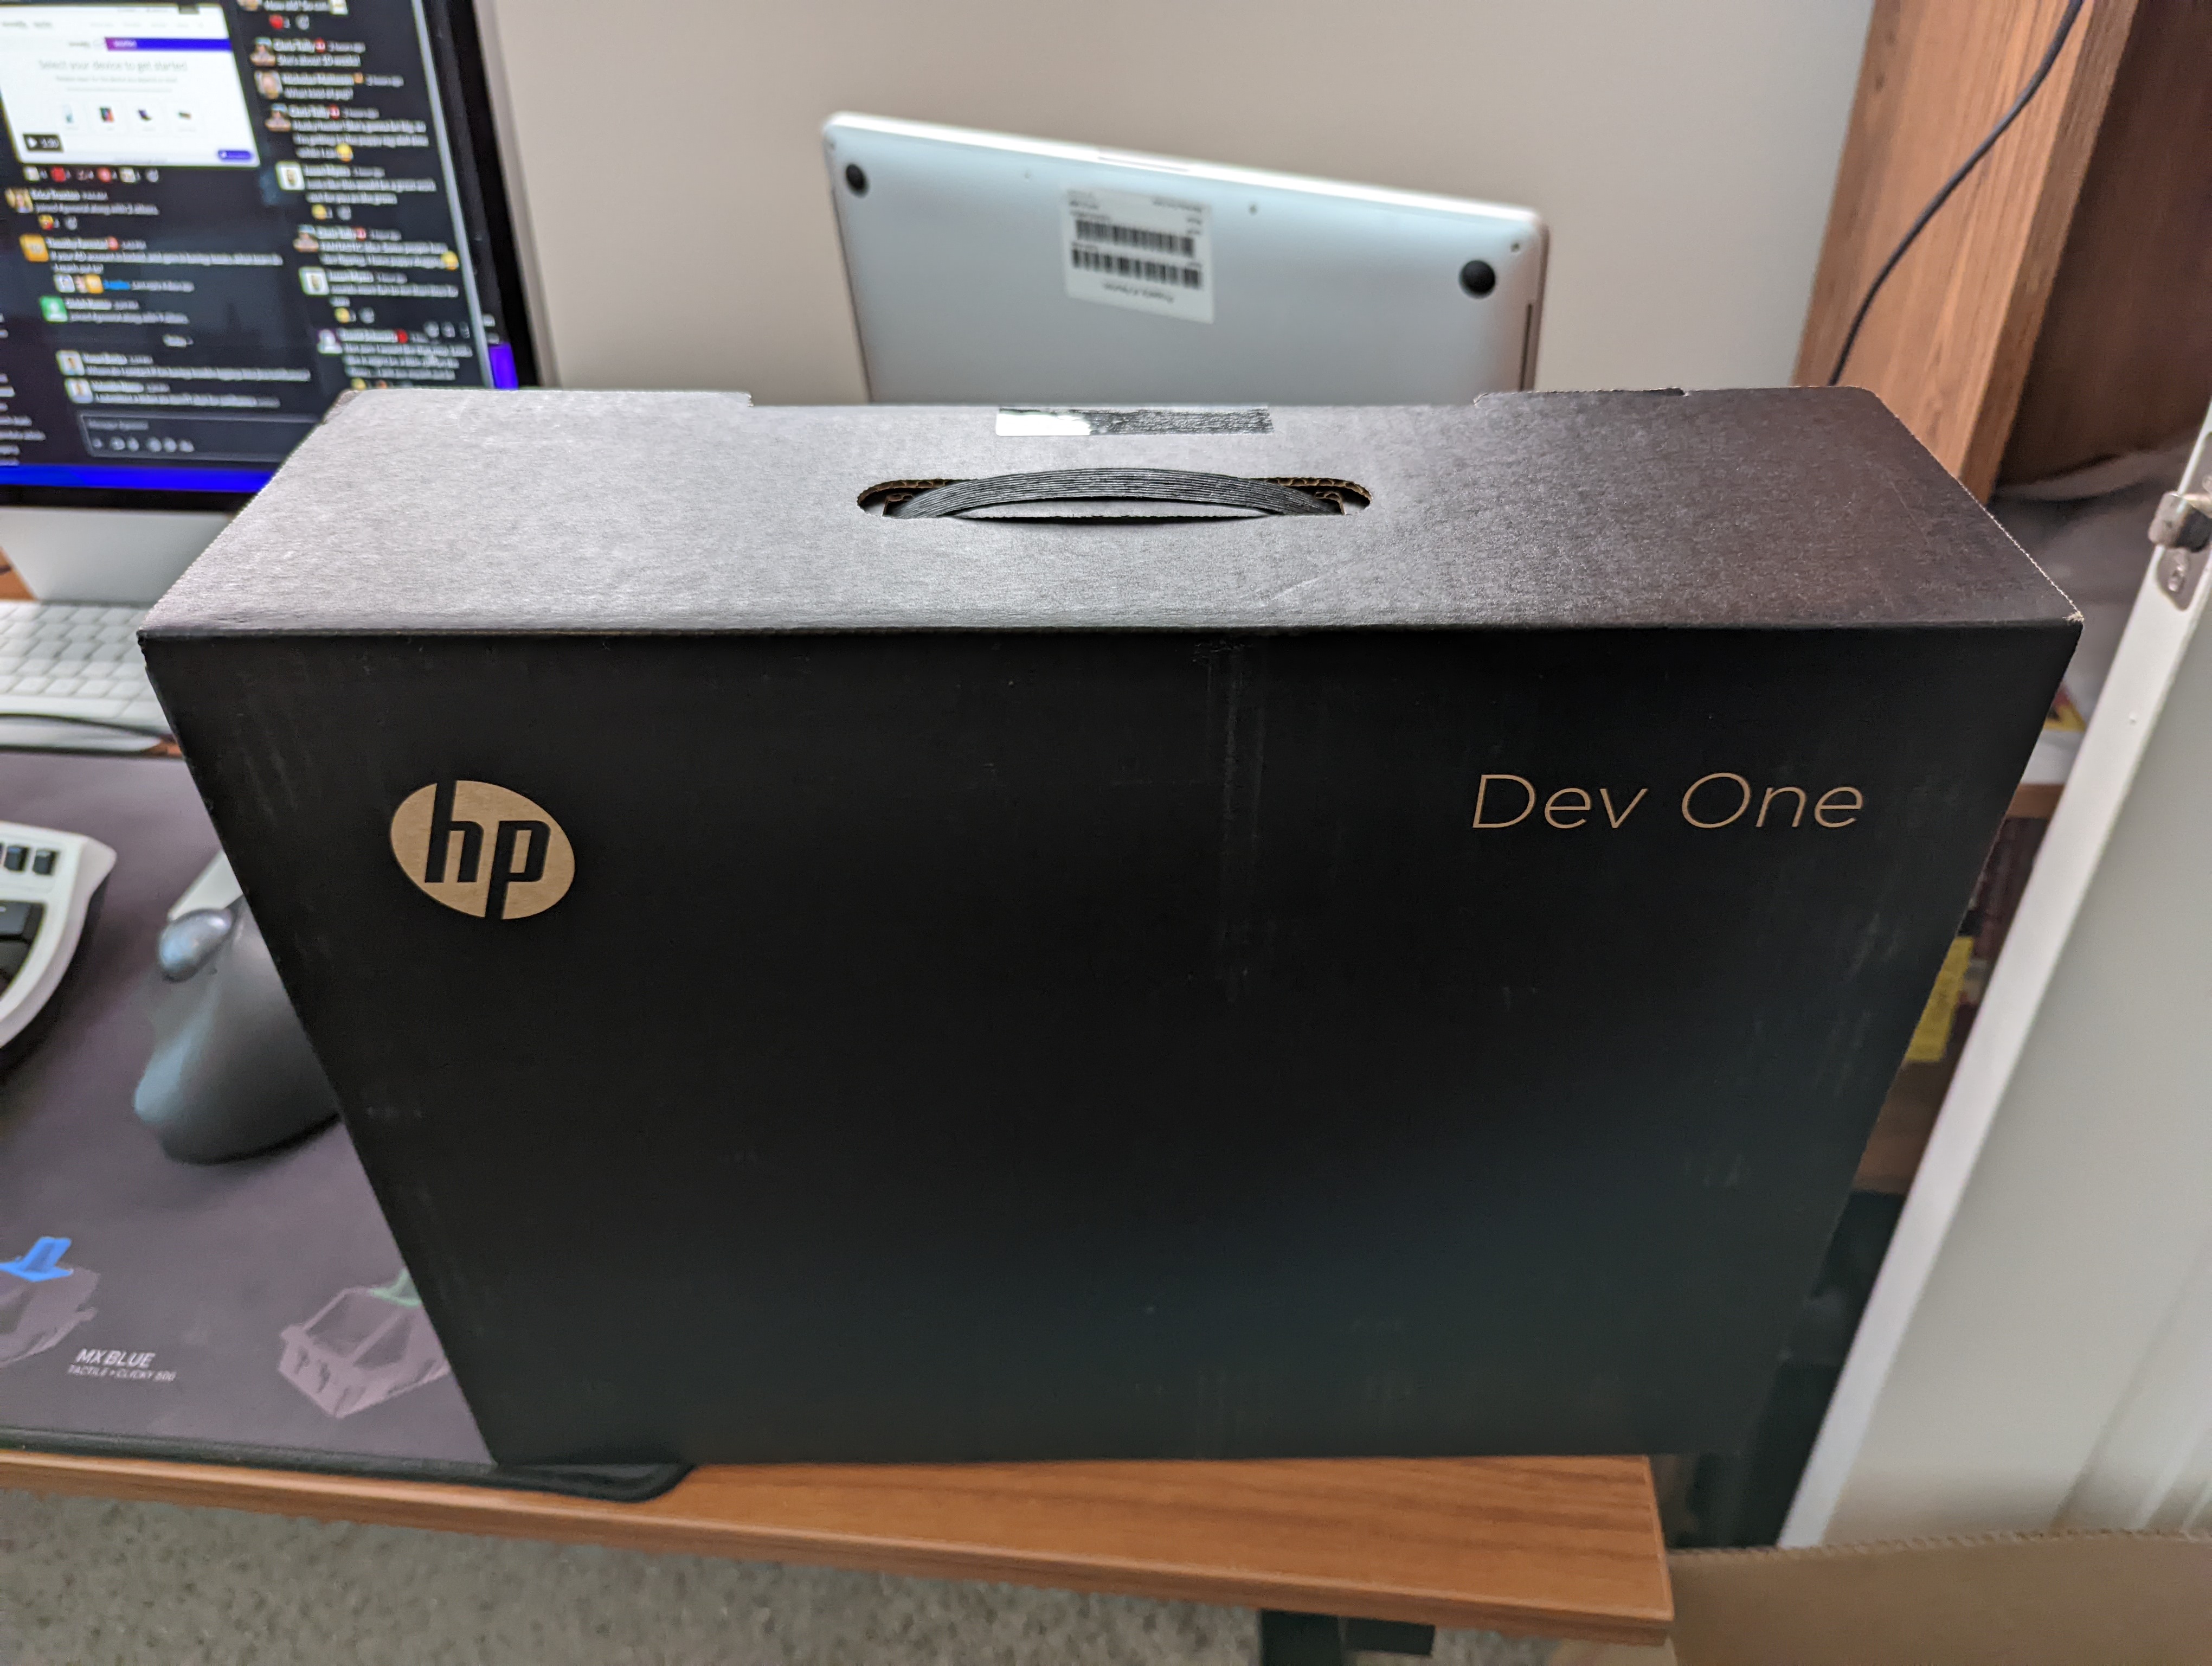 HP Dev One Outer Box